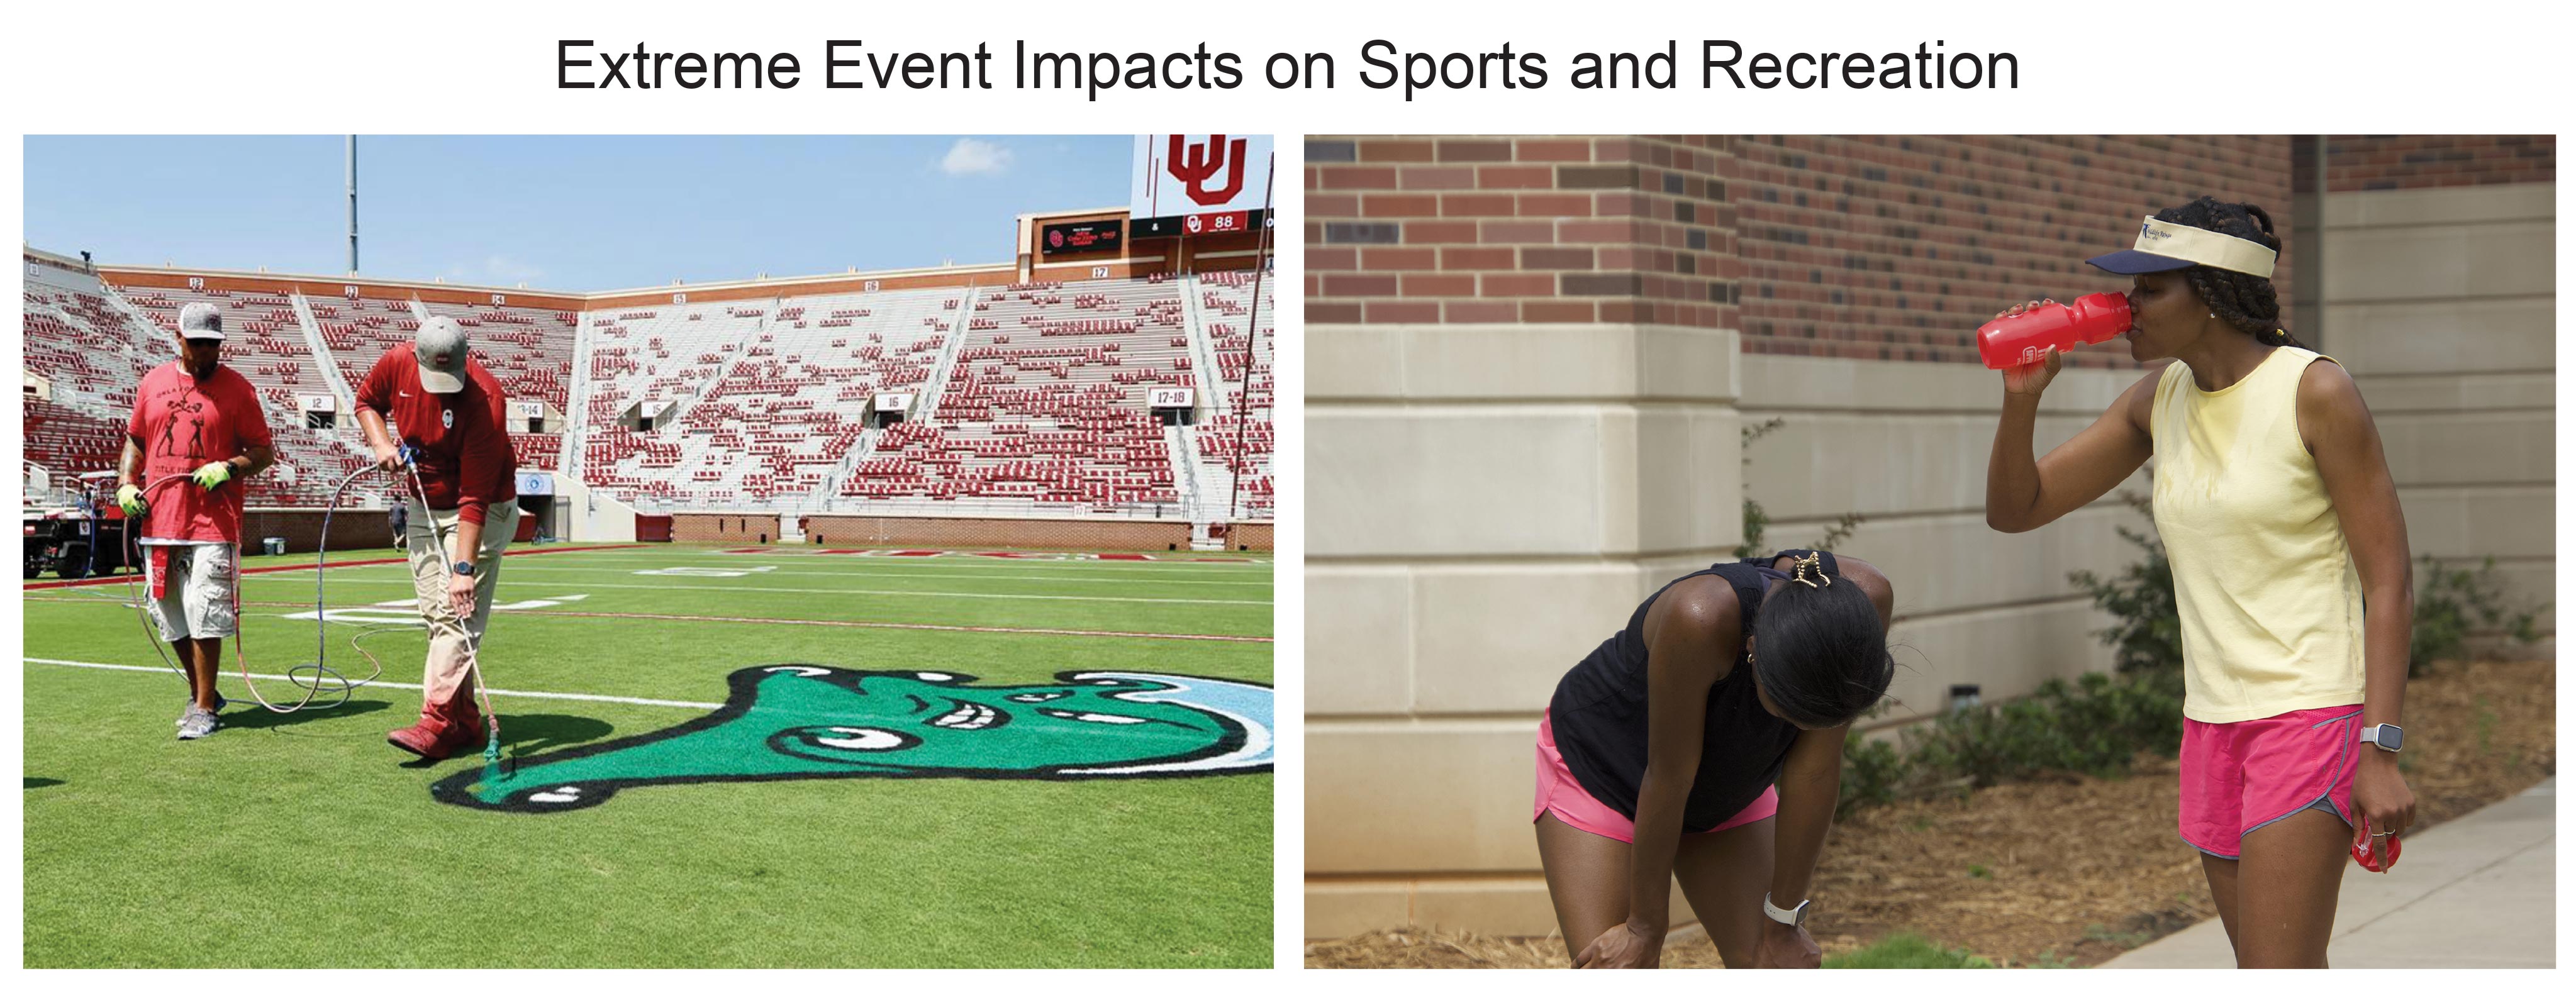 Extreme Event Impacts on Sports and Recreation